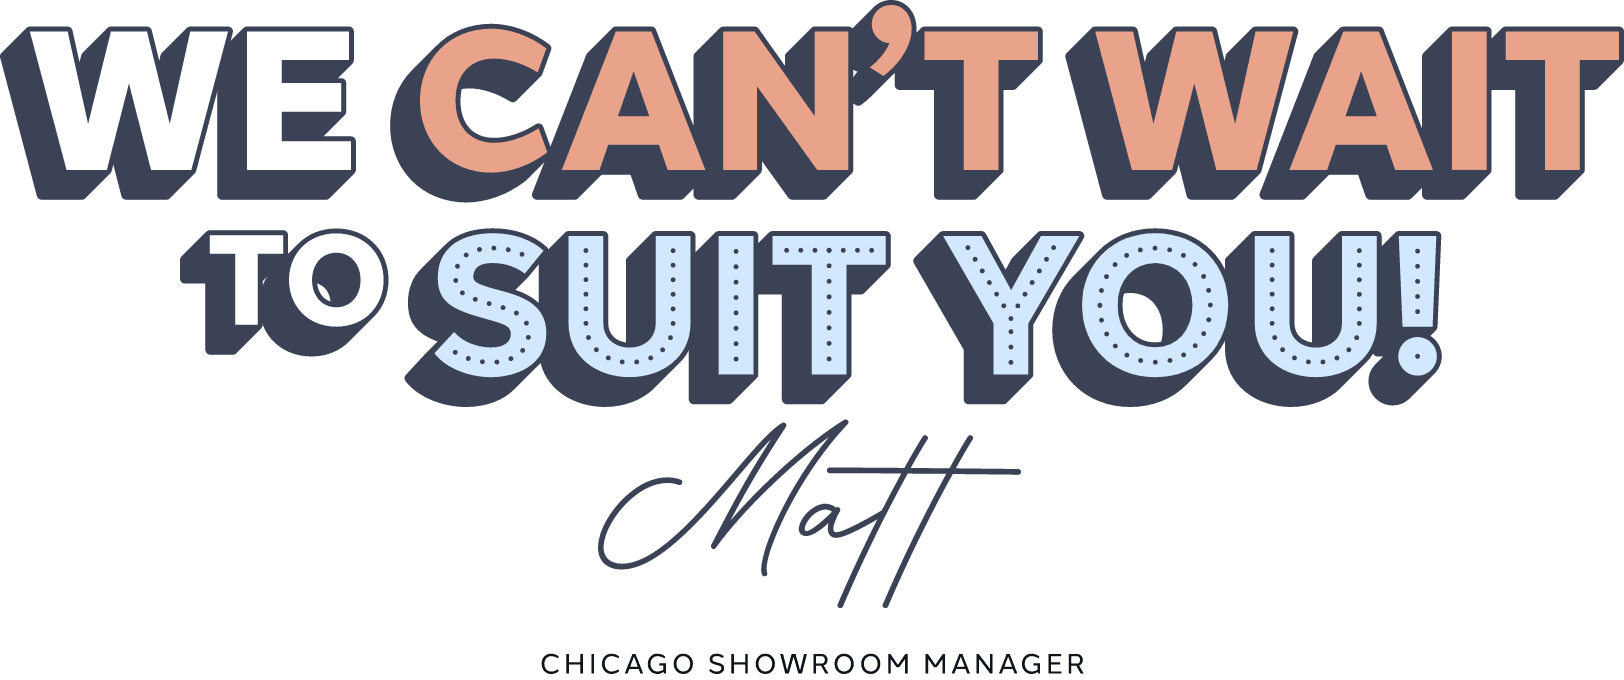 Colorful typography reading “We can't wait to suit you.” from Matt, Chicago suit store manager.